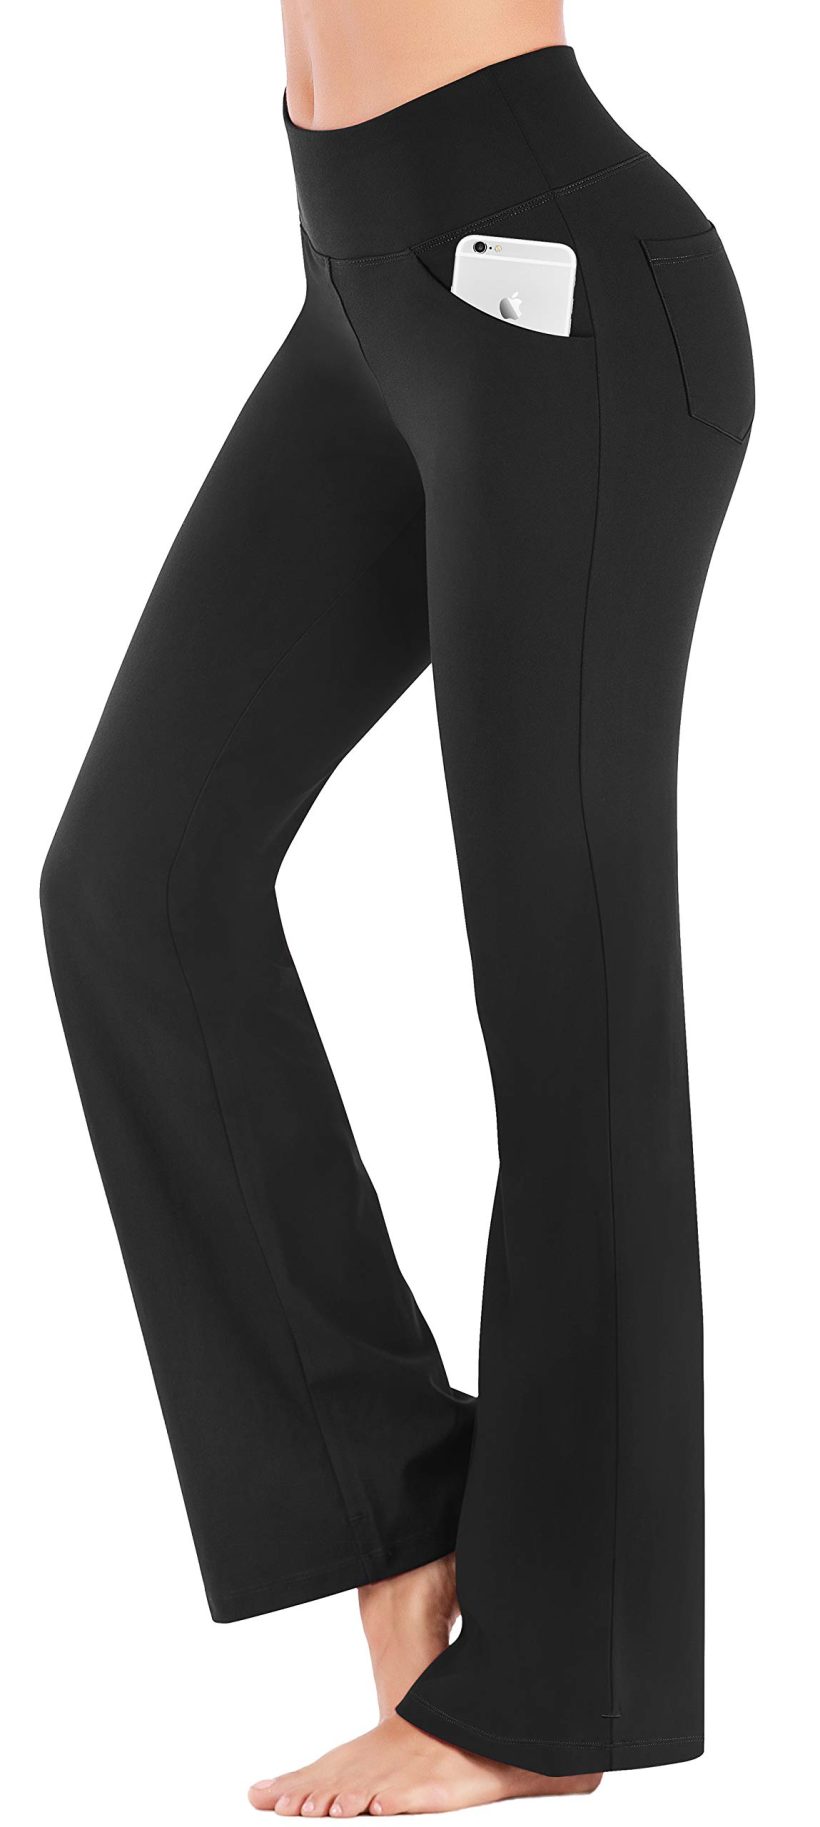 IUGA Bootcut Yoga Pants with Pockets for Women